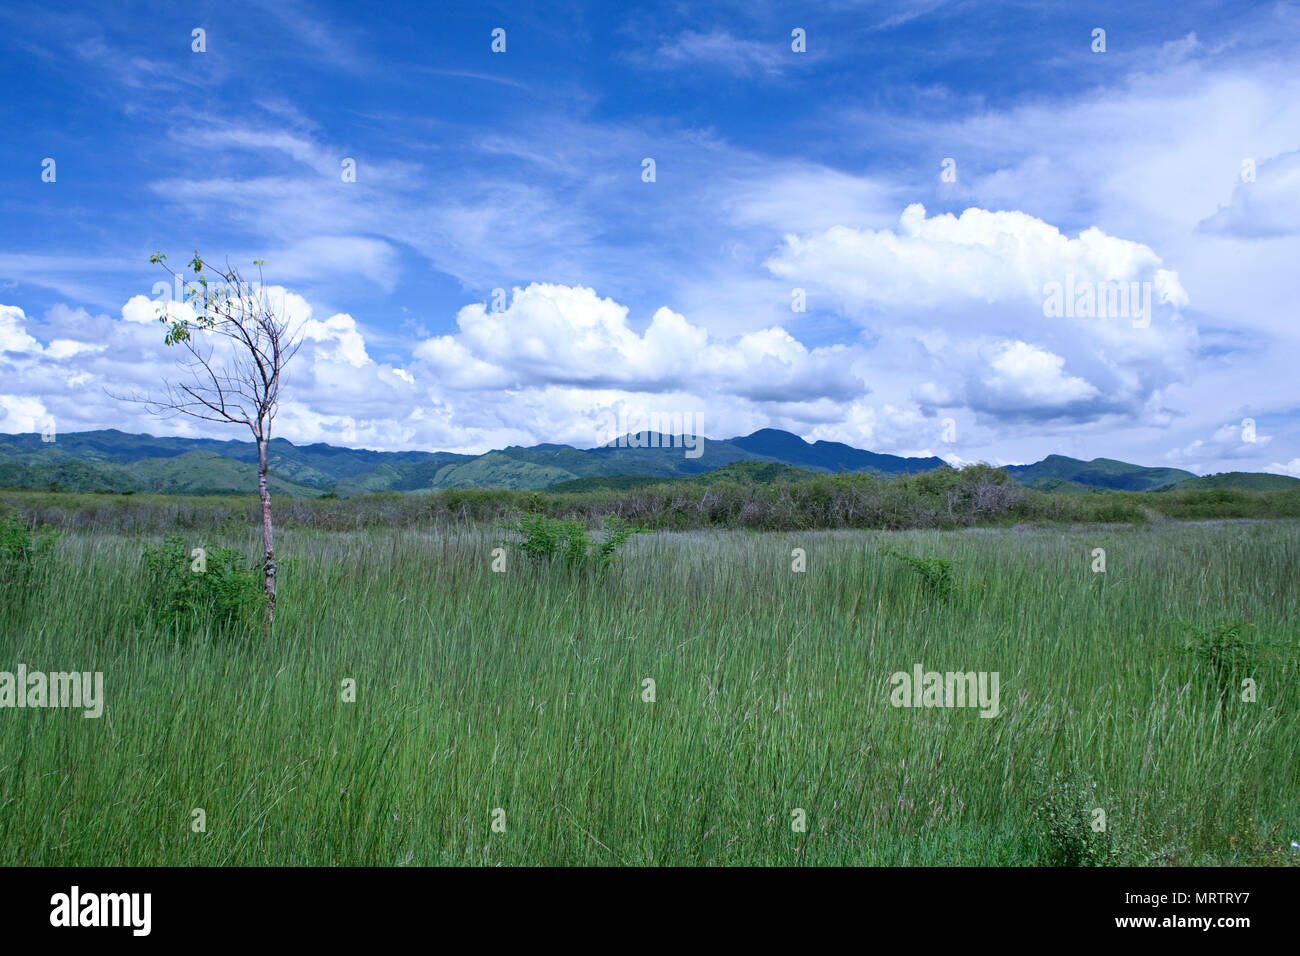 Lonely small tree growing in field on outskirts of Trinidad, Cuba. Stock Photo